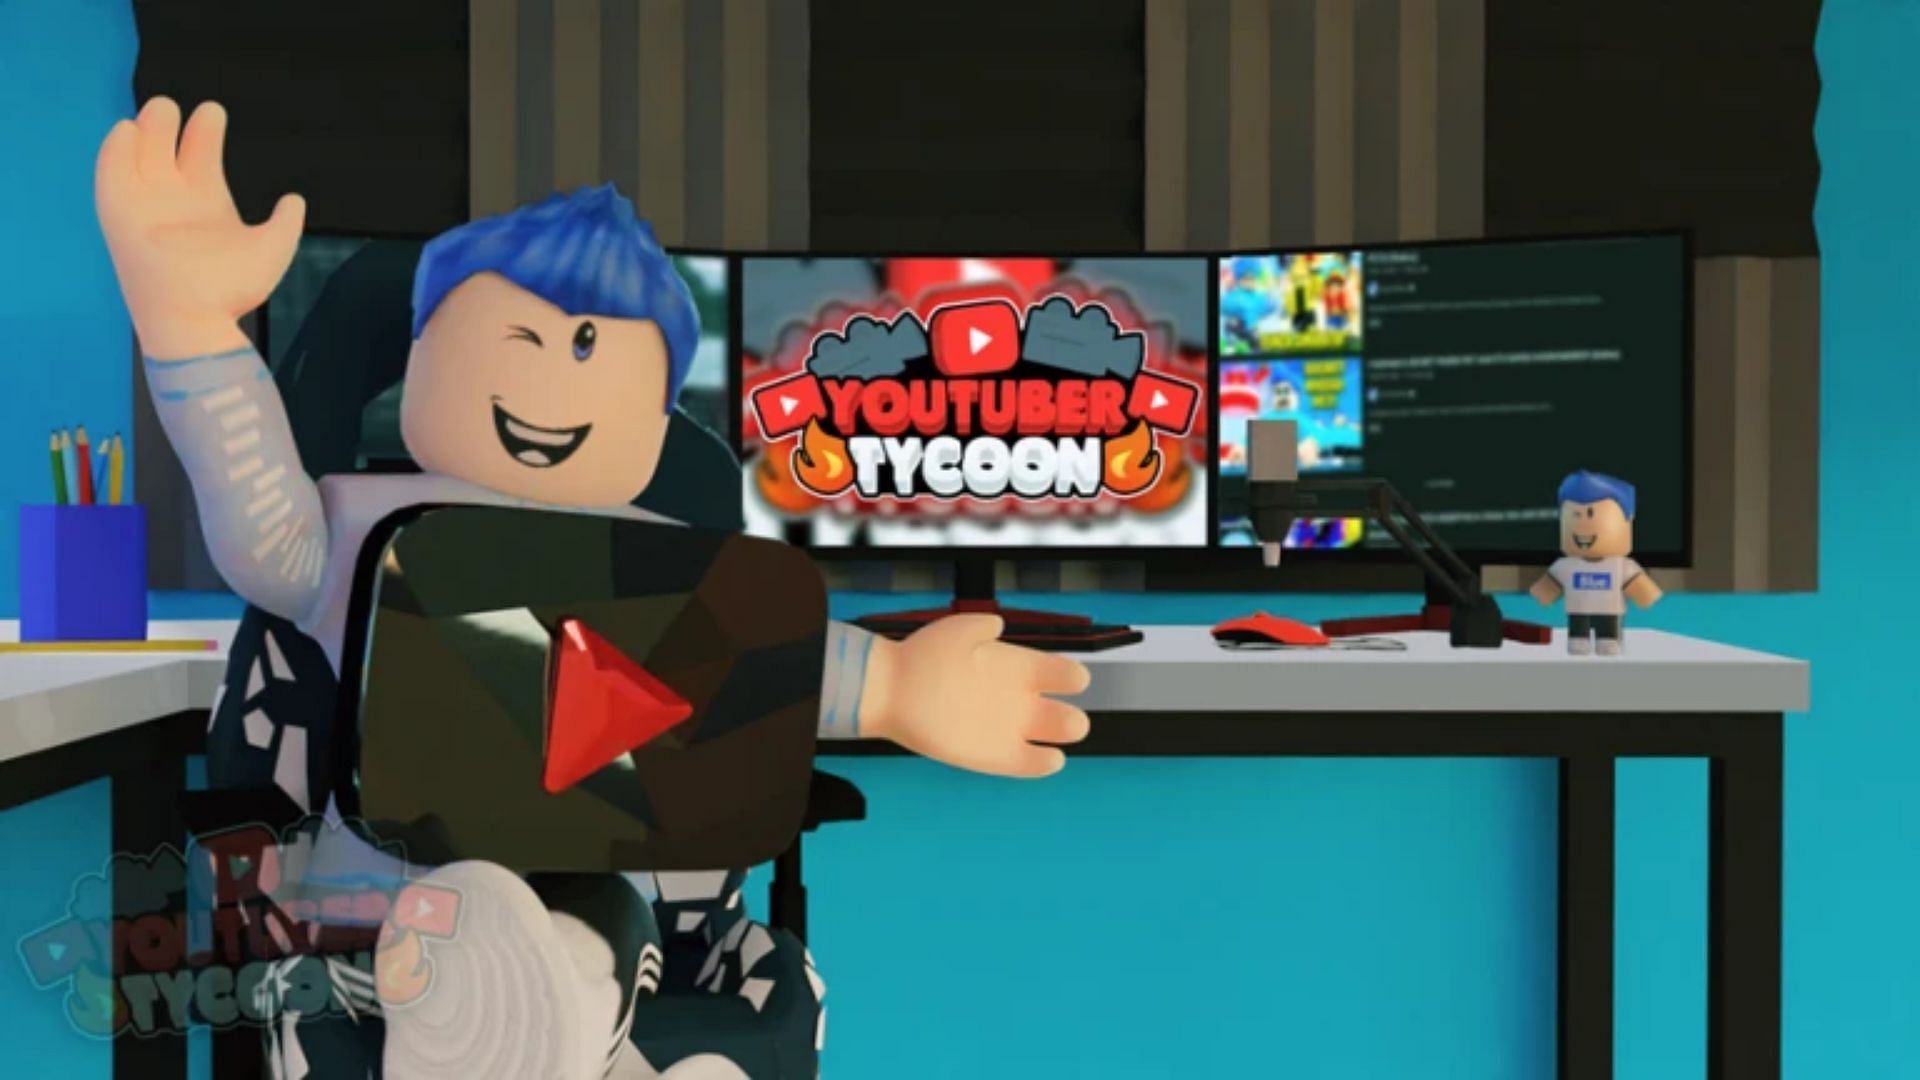 Official poster for YouTuber Tycoon (Image via Roblox)